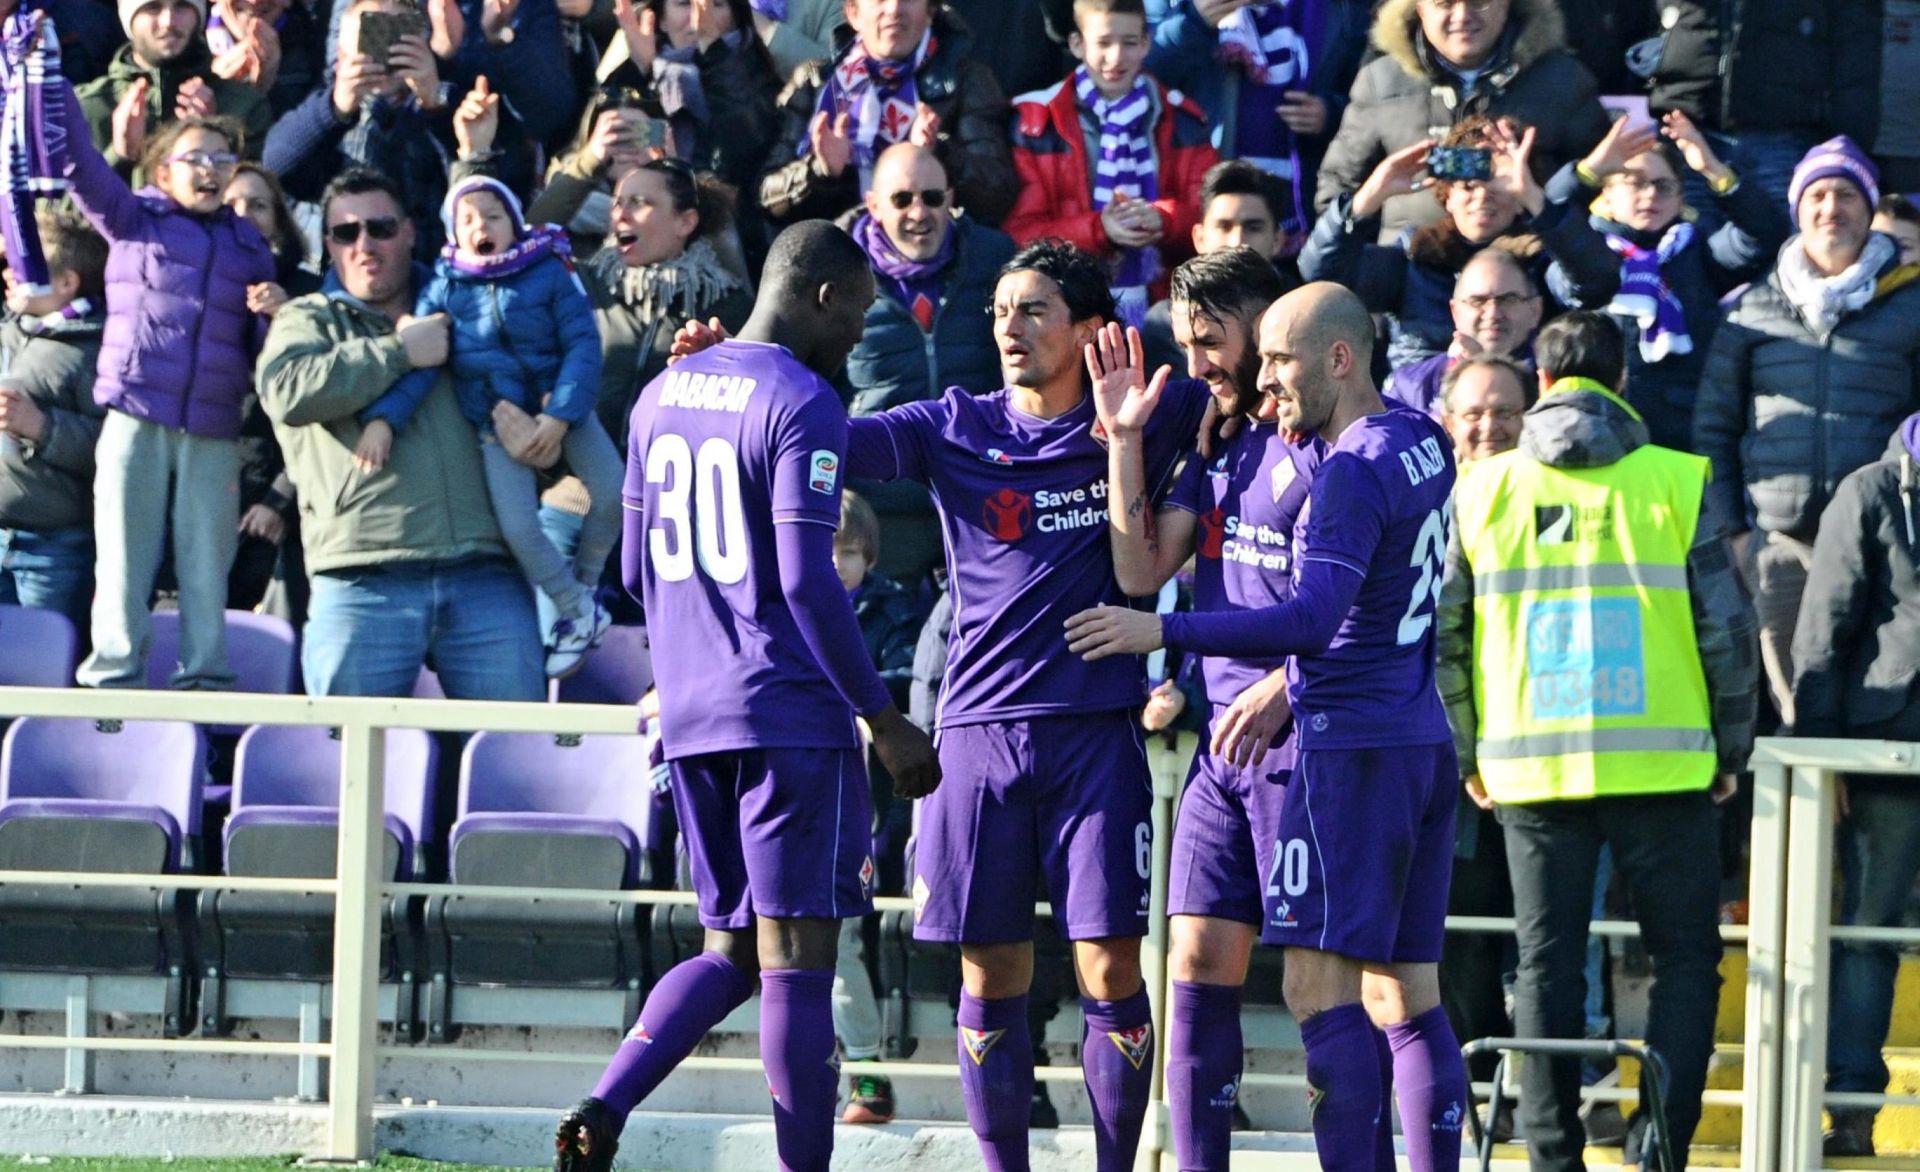 epa05122770 Fiorentina's Gonzalo Rodriguez (2-R) jubilates with his teammates after scoring a goal during the Italian Serie A soccer match ACF Fiorentina vs Torino FC at Artemio Franchi stadium in Florence, Italy, 24 January 2016.  EPA/MAURIZIO DEGL'INNOCENTI